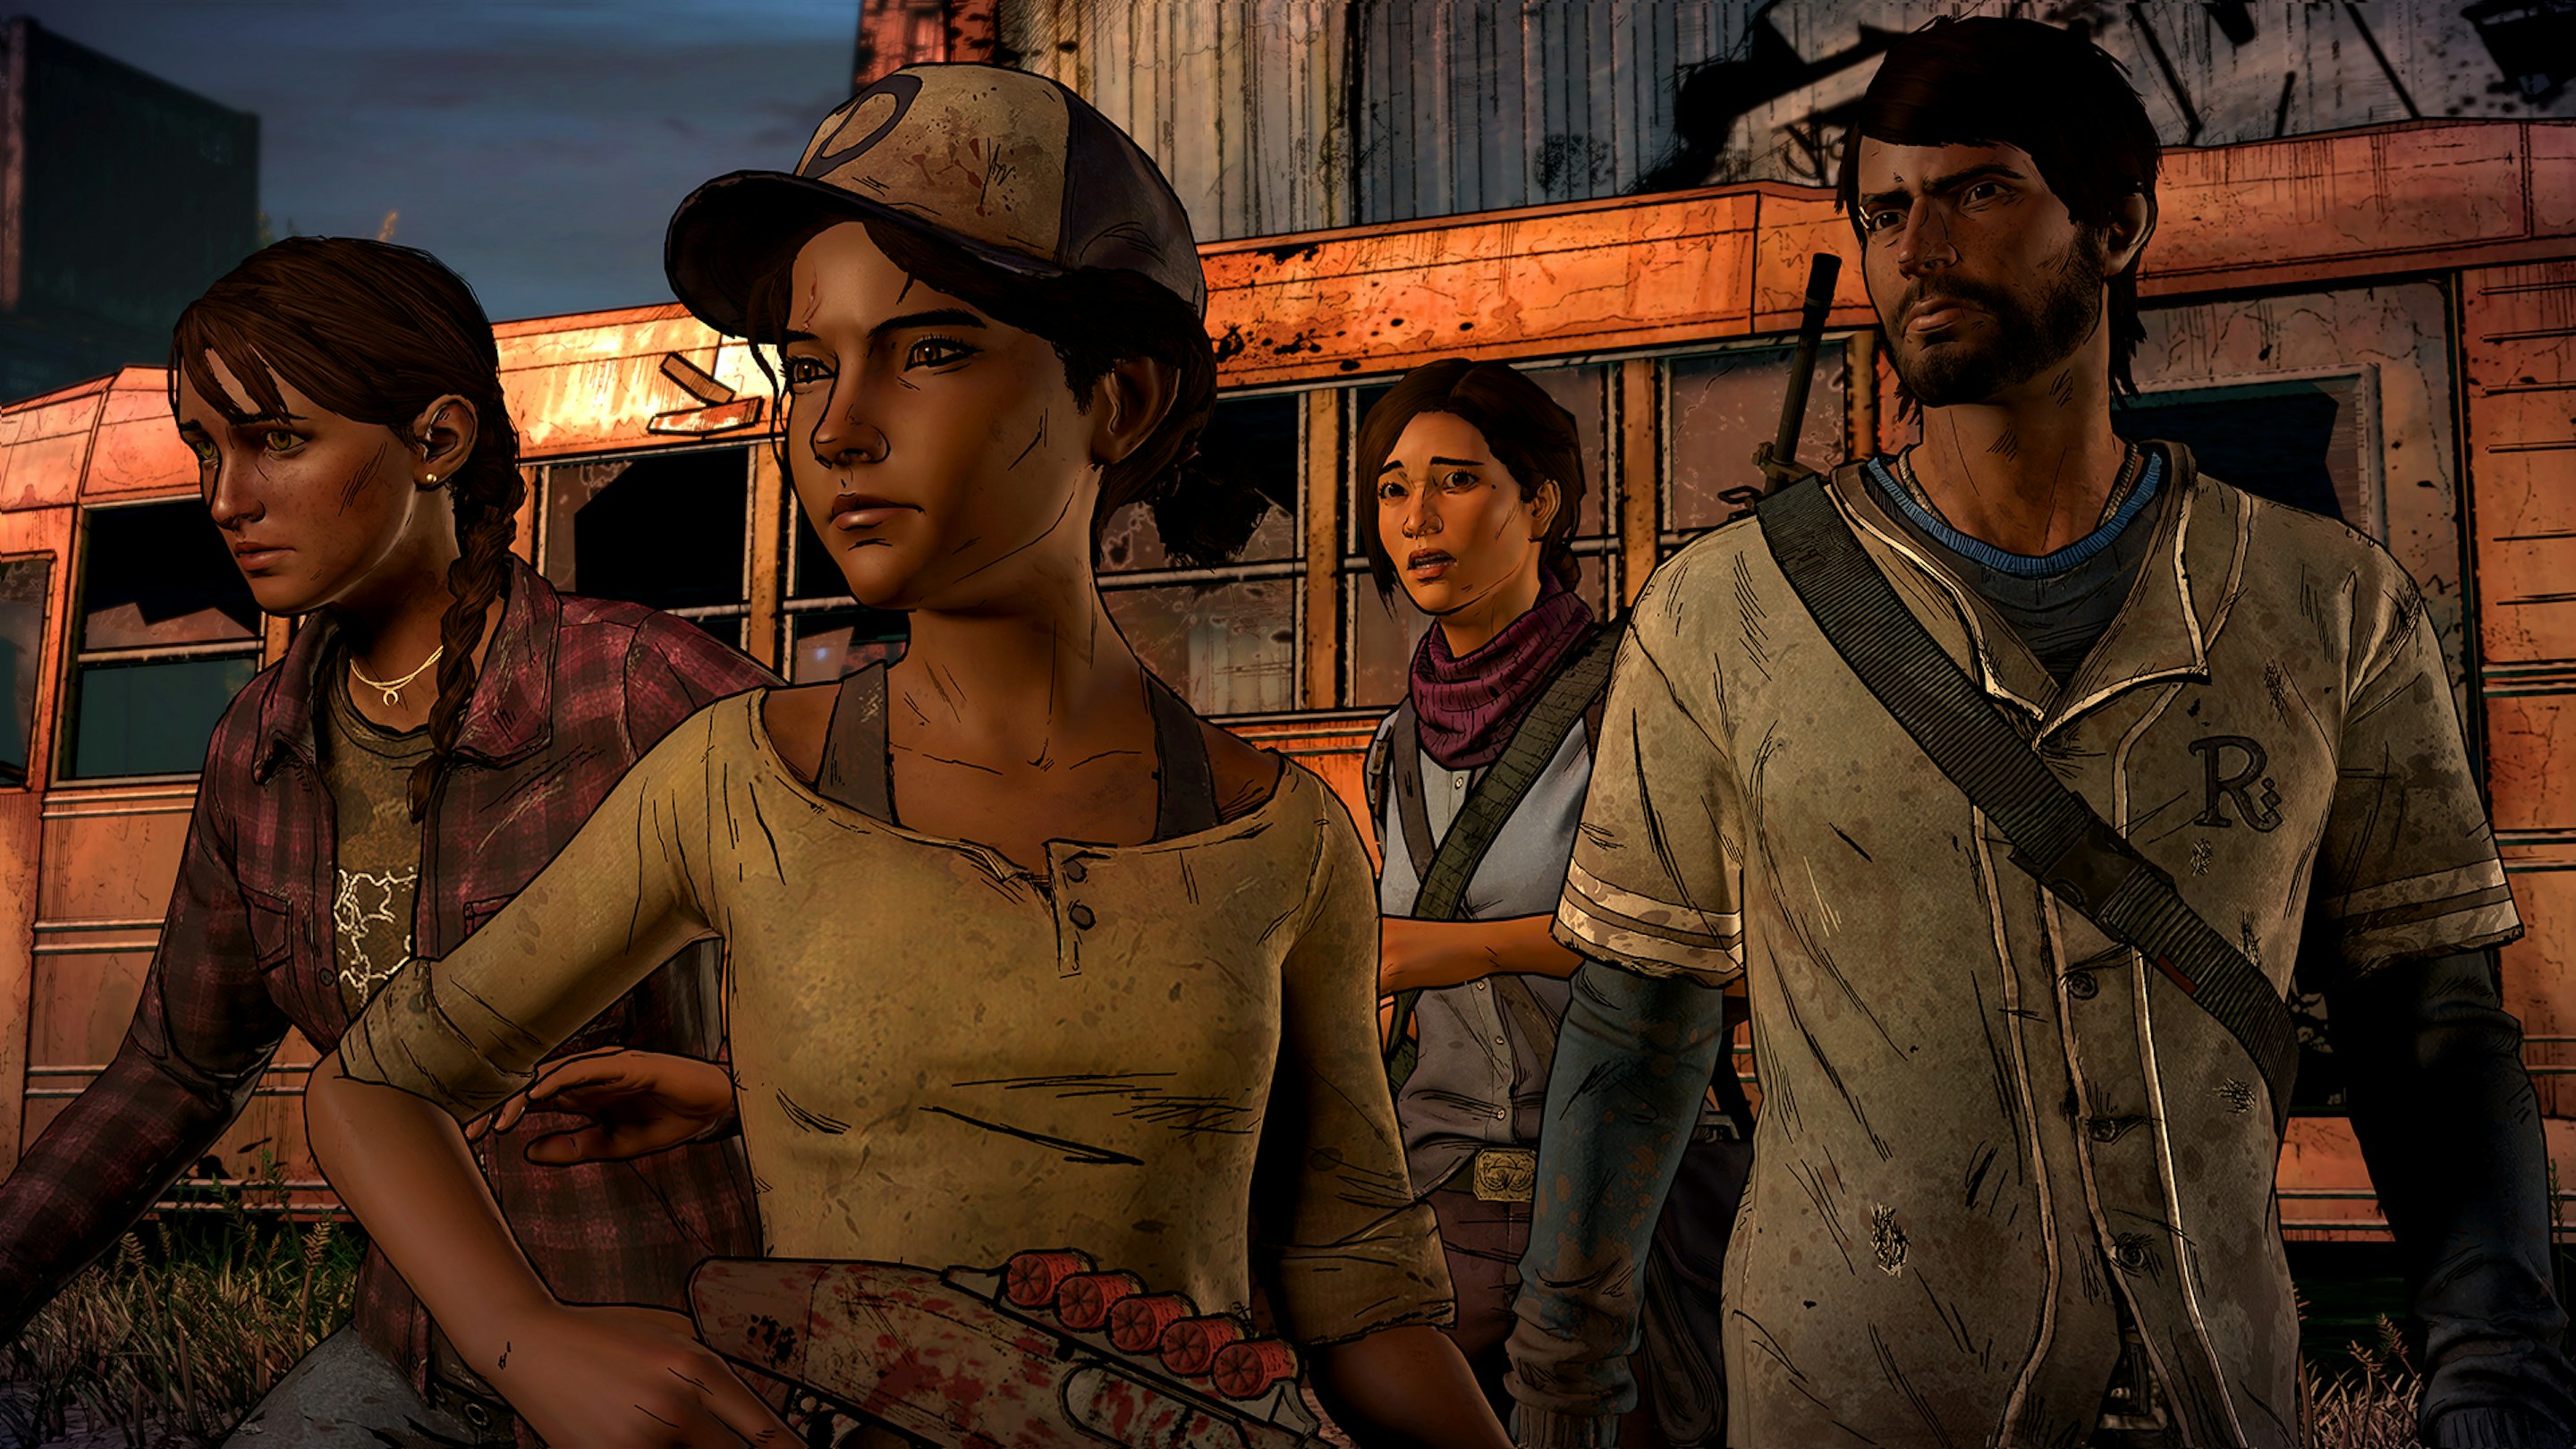 Clem From The Walking Dead Was Always Headed For Darkness Inverse